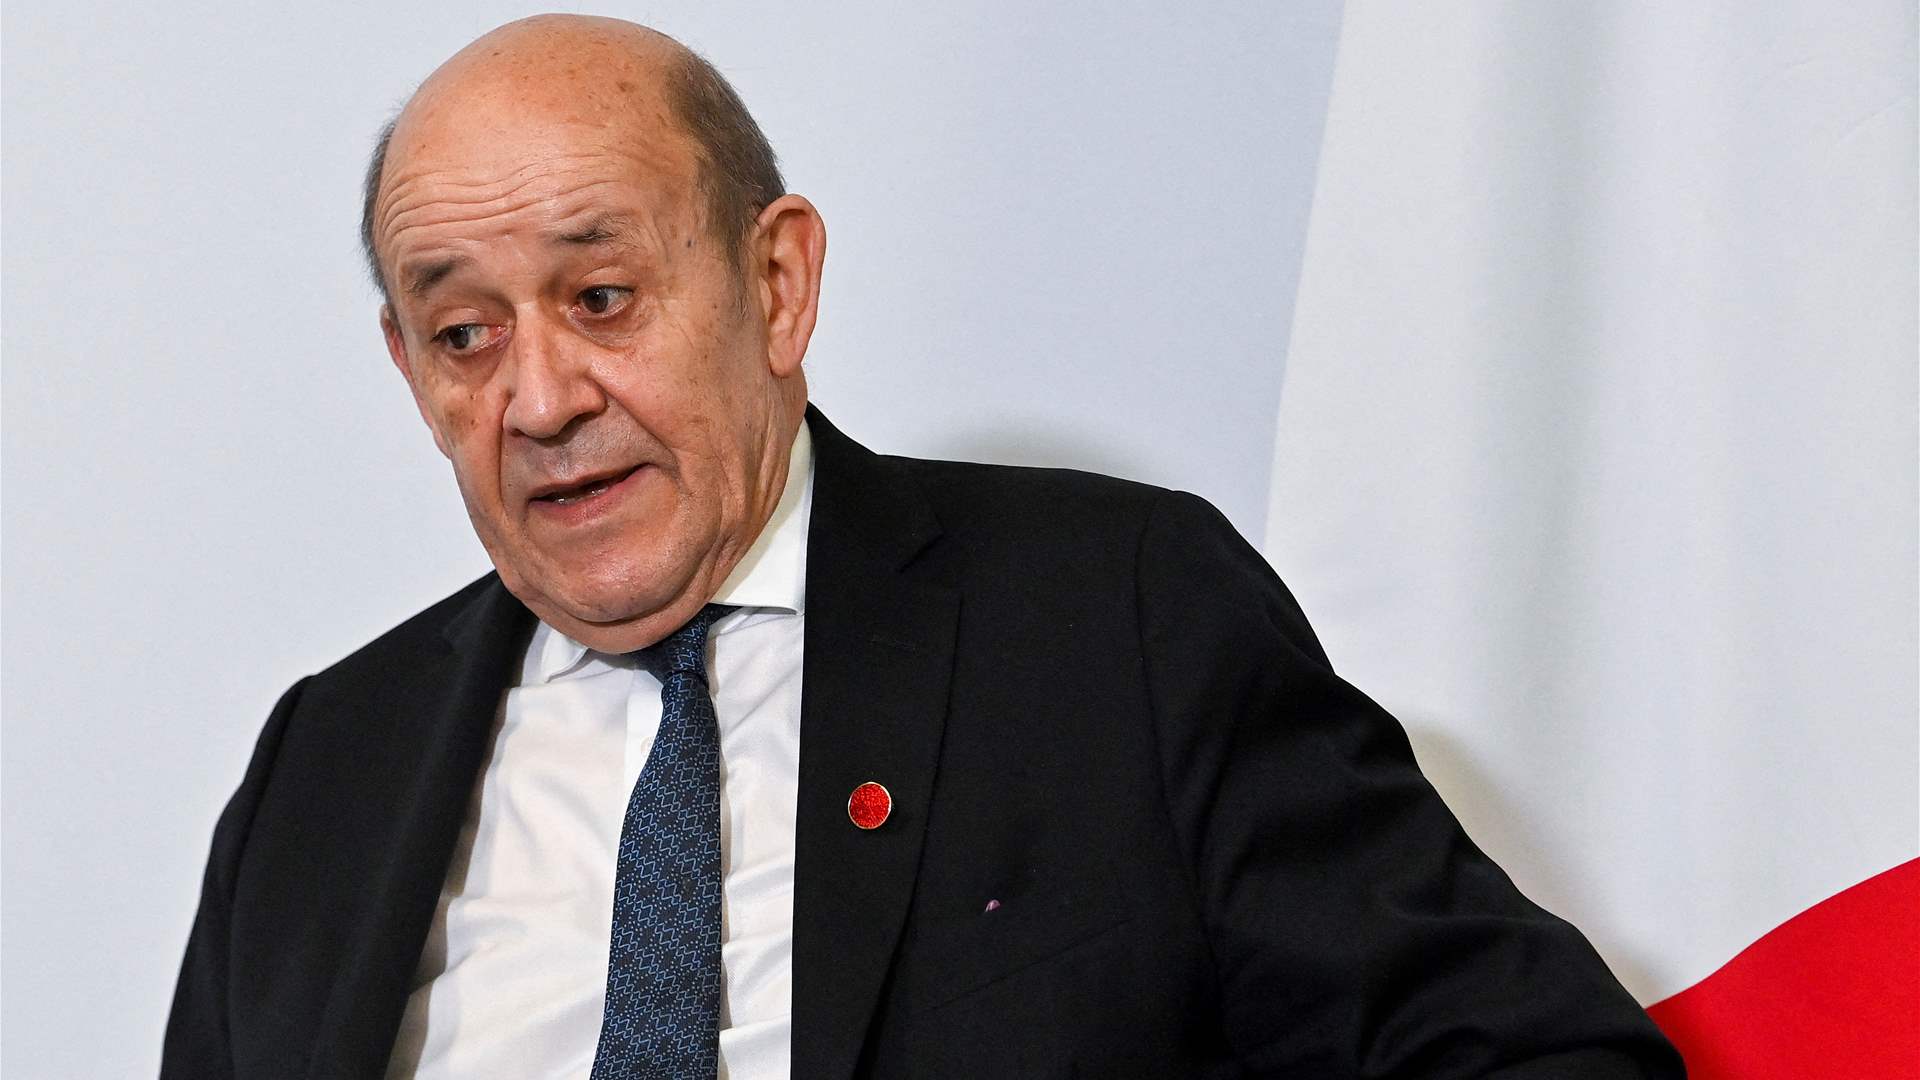 Lebanese political forces await a solution: Le Drian&#39;s visit under scrutiny